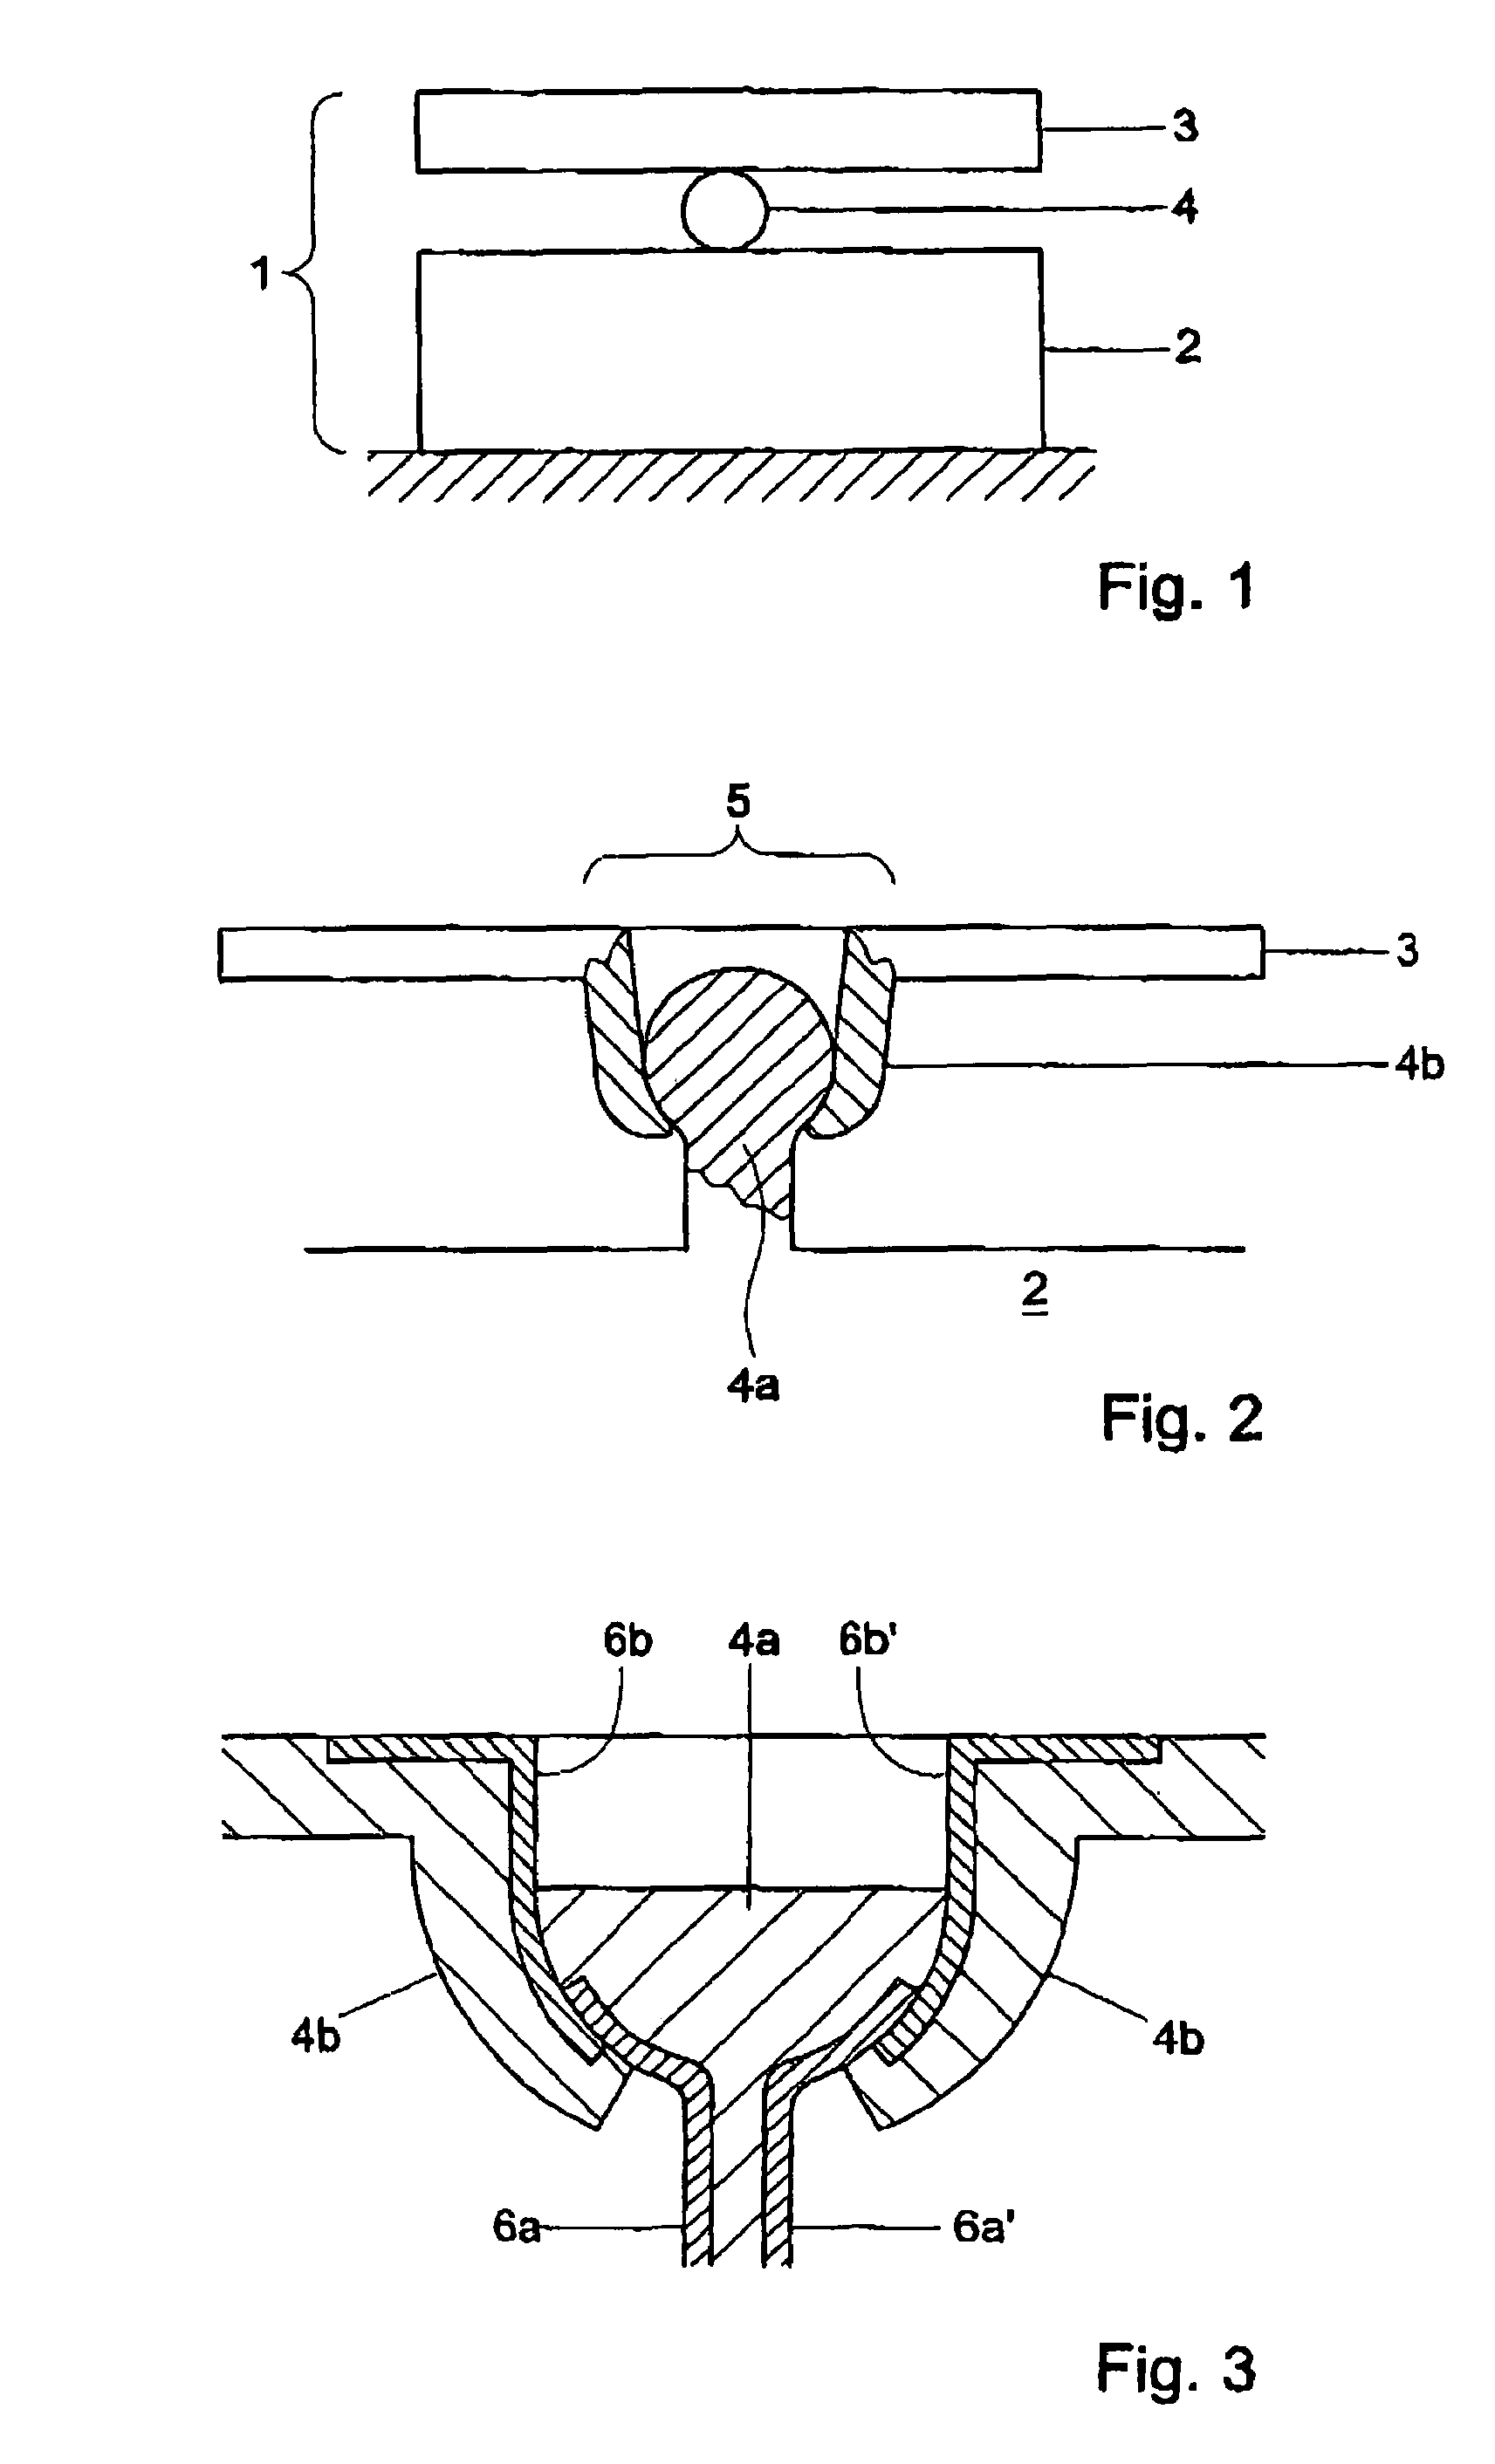 Mirror adjustment mechanism with electrical connection